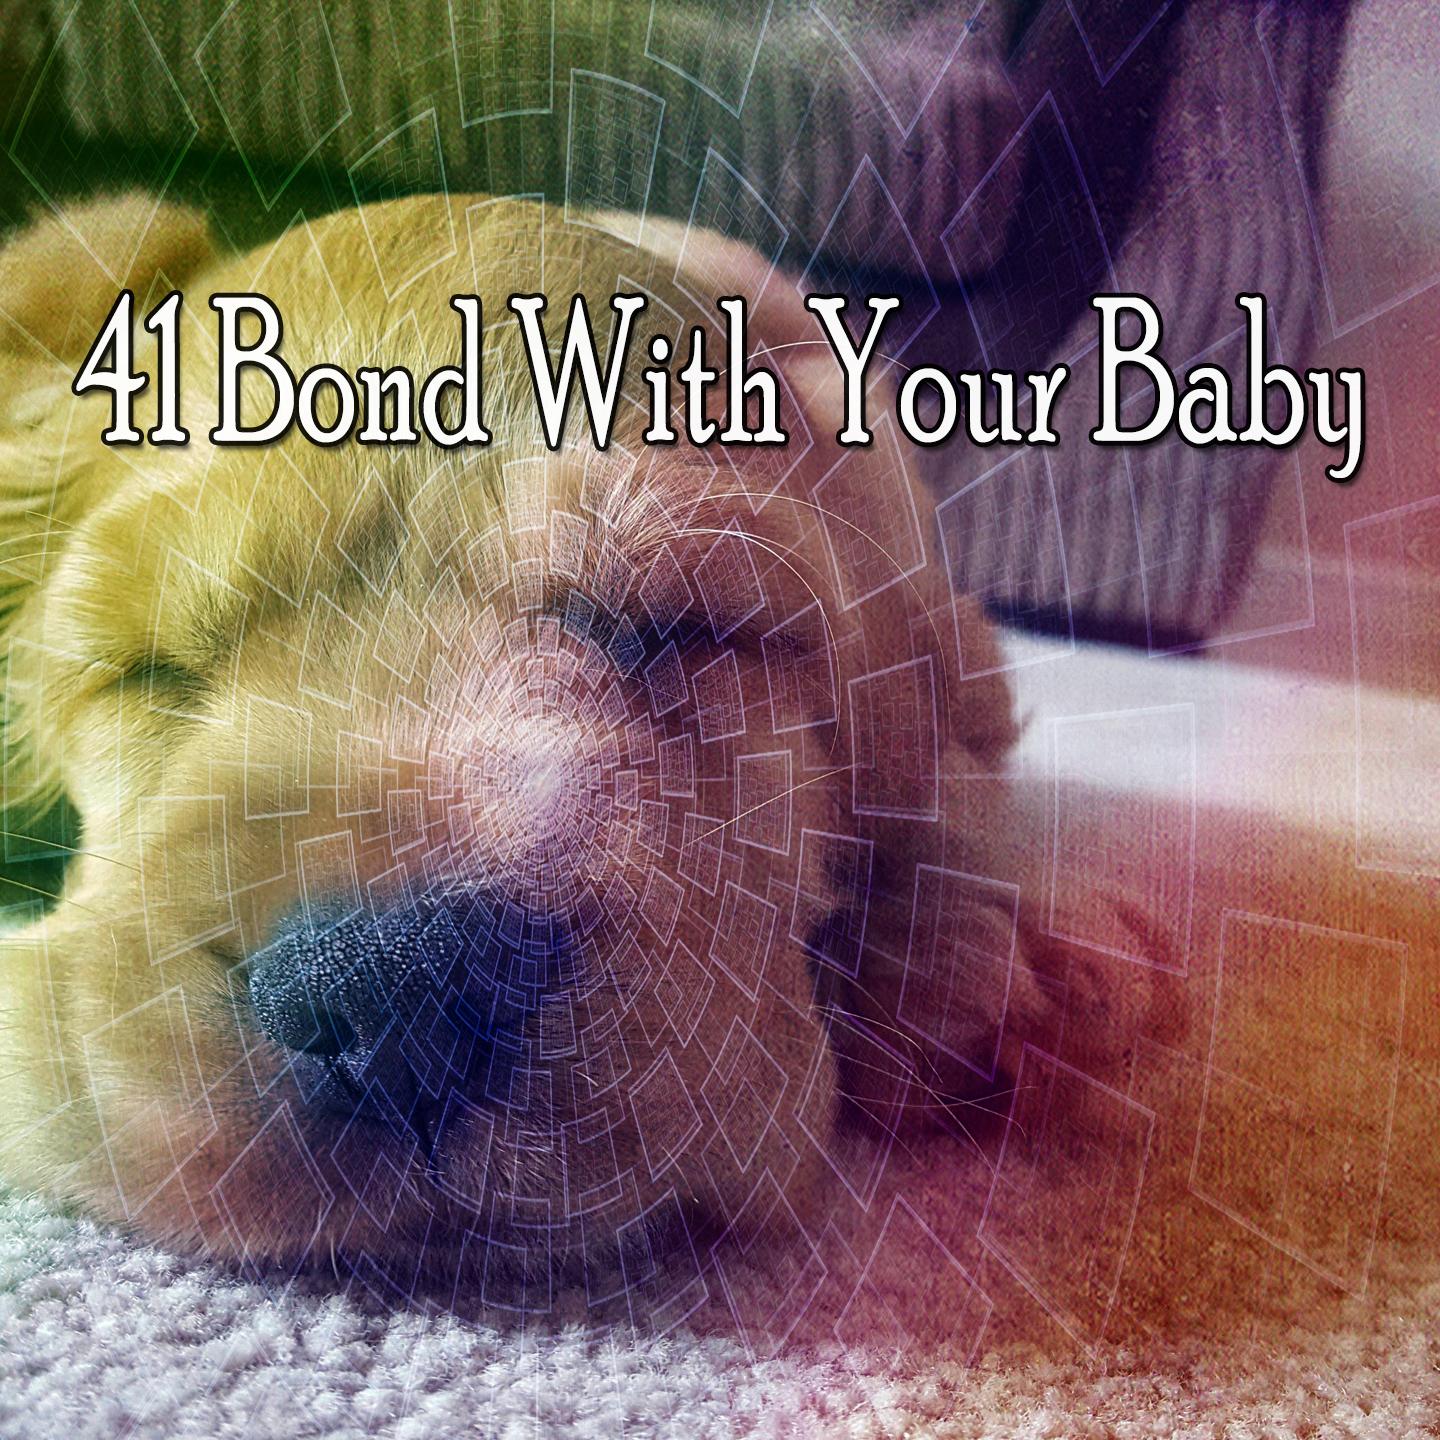 41 Bond with Your Baby